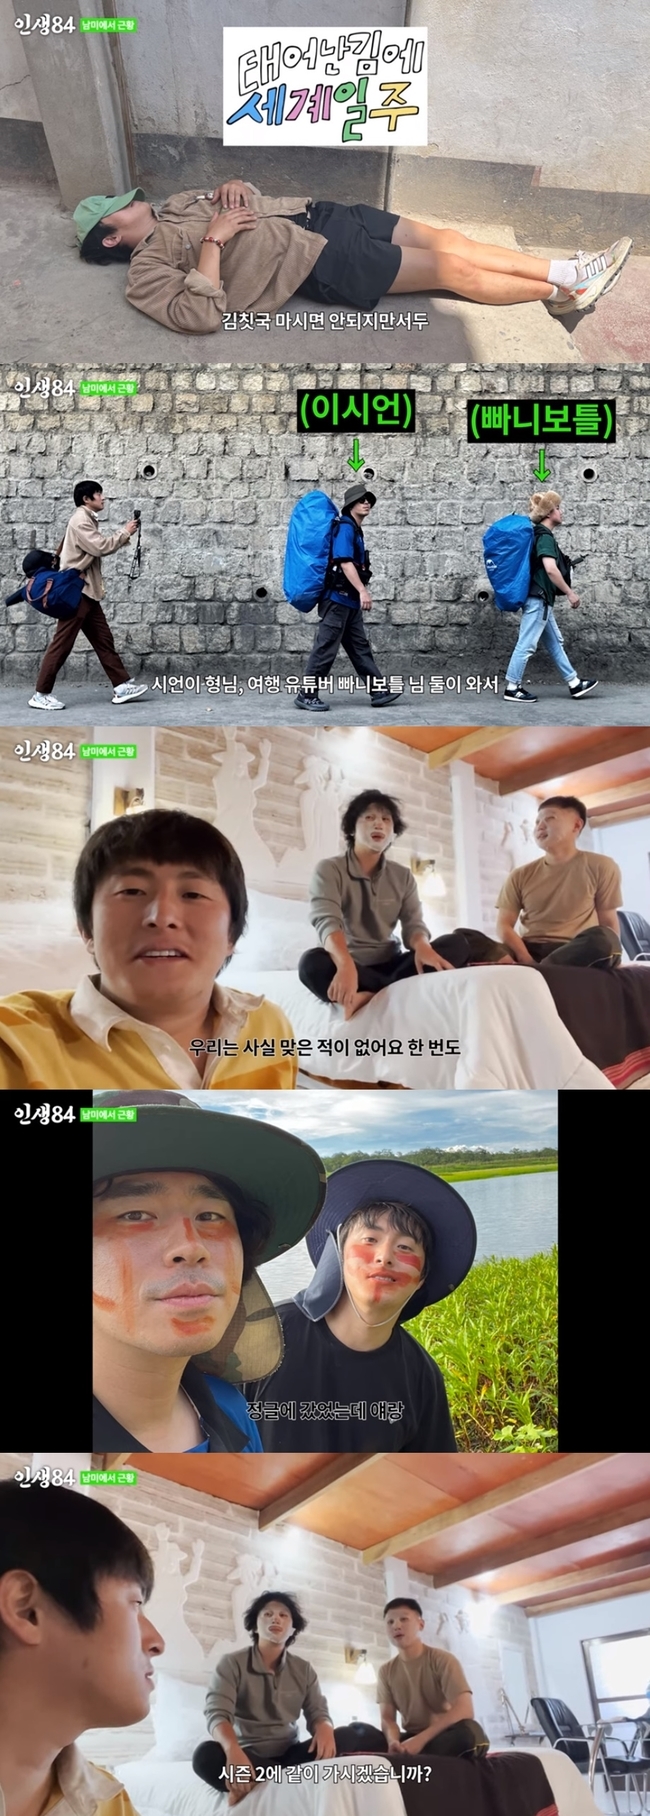  ⁇ a round-the-world journey ⁇  confirmed its first broadcast on December 11th.MBCs new entertainment program  ⁇  As you are born, World One Week (hereinafter referred to as Taegye One Week) will be broadcasted on Sunday, December 11 at 5:00 pm on November 11th.At the end of 2022, Kian84, Lee Si-eon, and Pani Bottle are preparing to enjoy the South American Travel of the day.Kian84, who is known as a man who lives in a place where he was born, concentrated his attention on the news of Lee Si-eon and Pani Bottle, who joined the surprise in South America from the departure scene where only one bag was left.On November 10th, Kian84 released an official video on the official YouTube channel, along with Travel Mate Lee Si-eon and Pani Bottle, somewhere in South America.While the bloody visuals of the three people in the video caused laughter, they also revealed unpublished photos taken locally and candid travel testimonials, raising expectations for  ⁇   ⁇   ⁇   ⁇   ⁇   ⁇ .